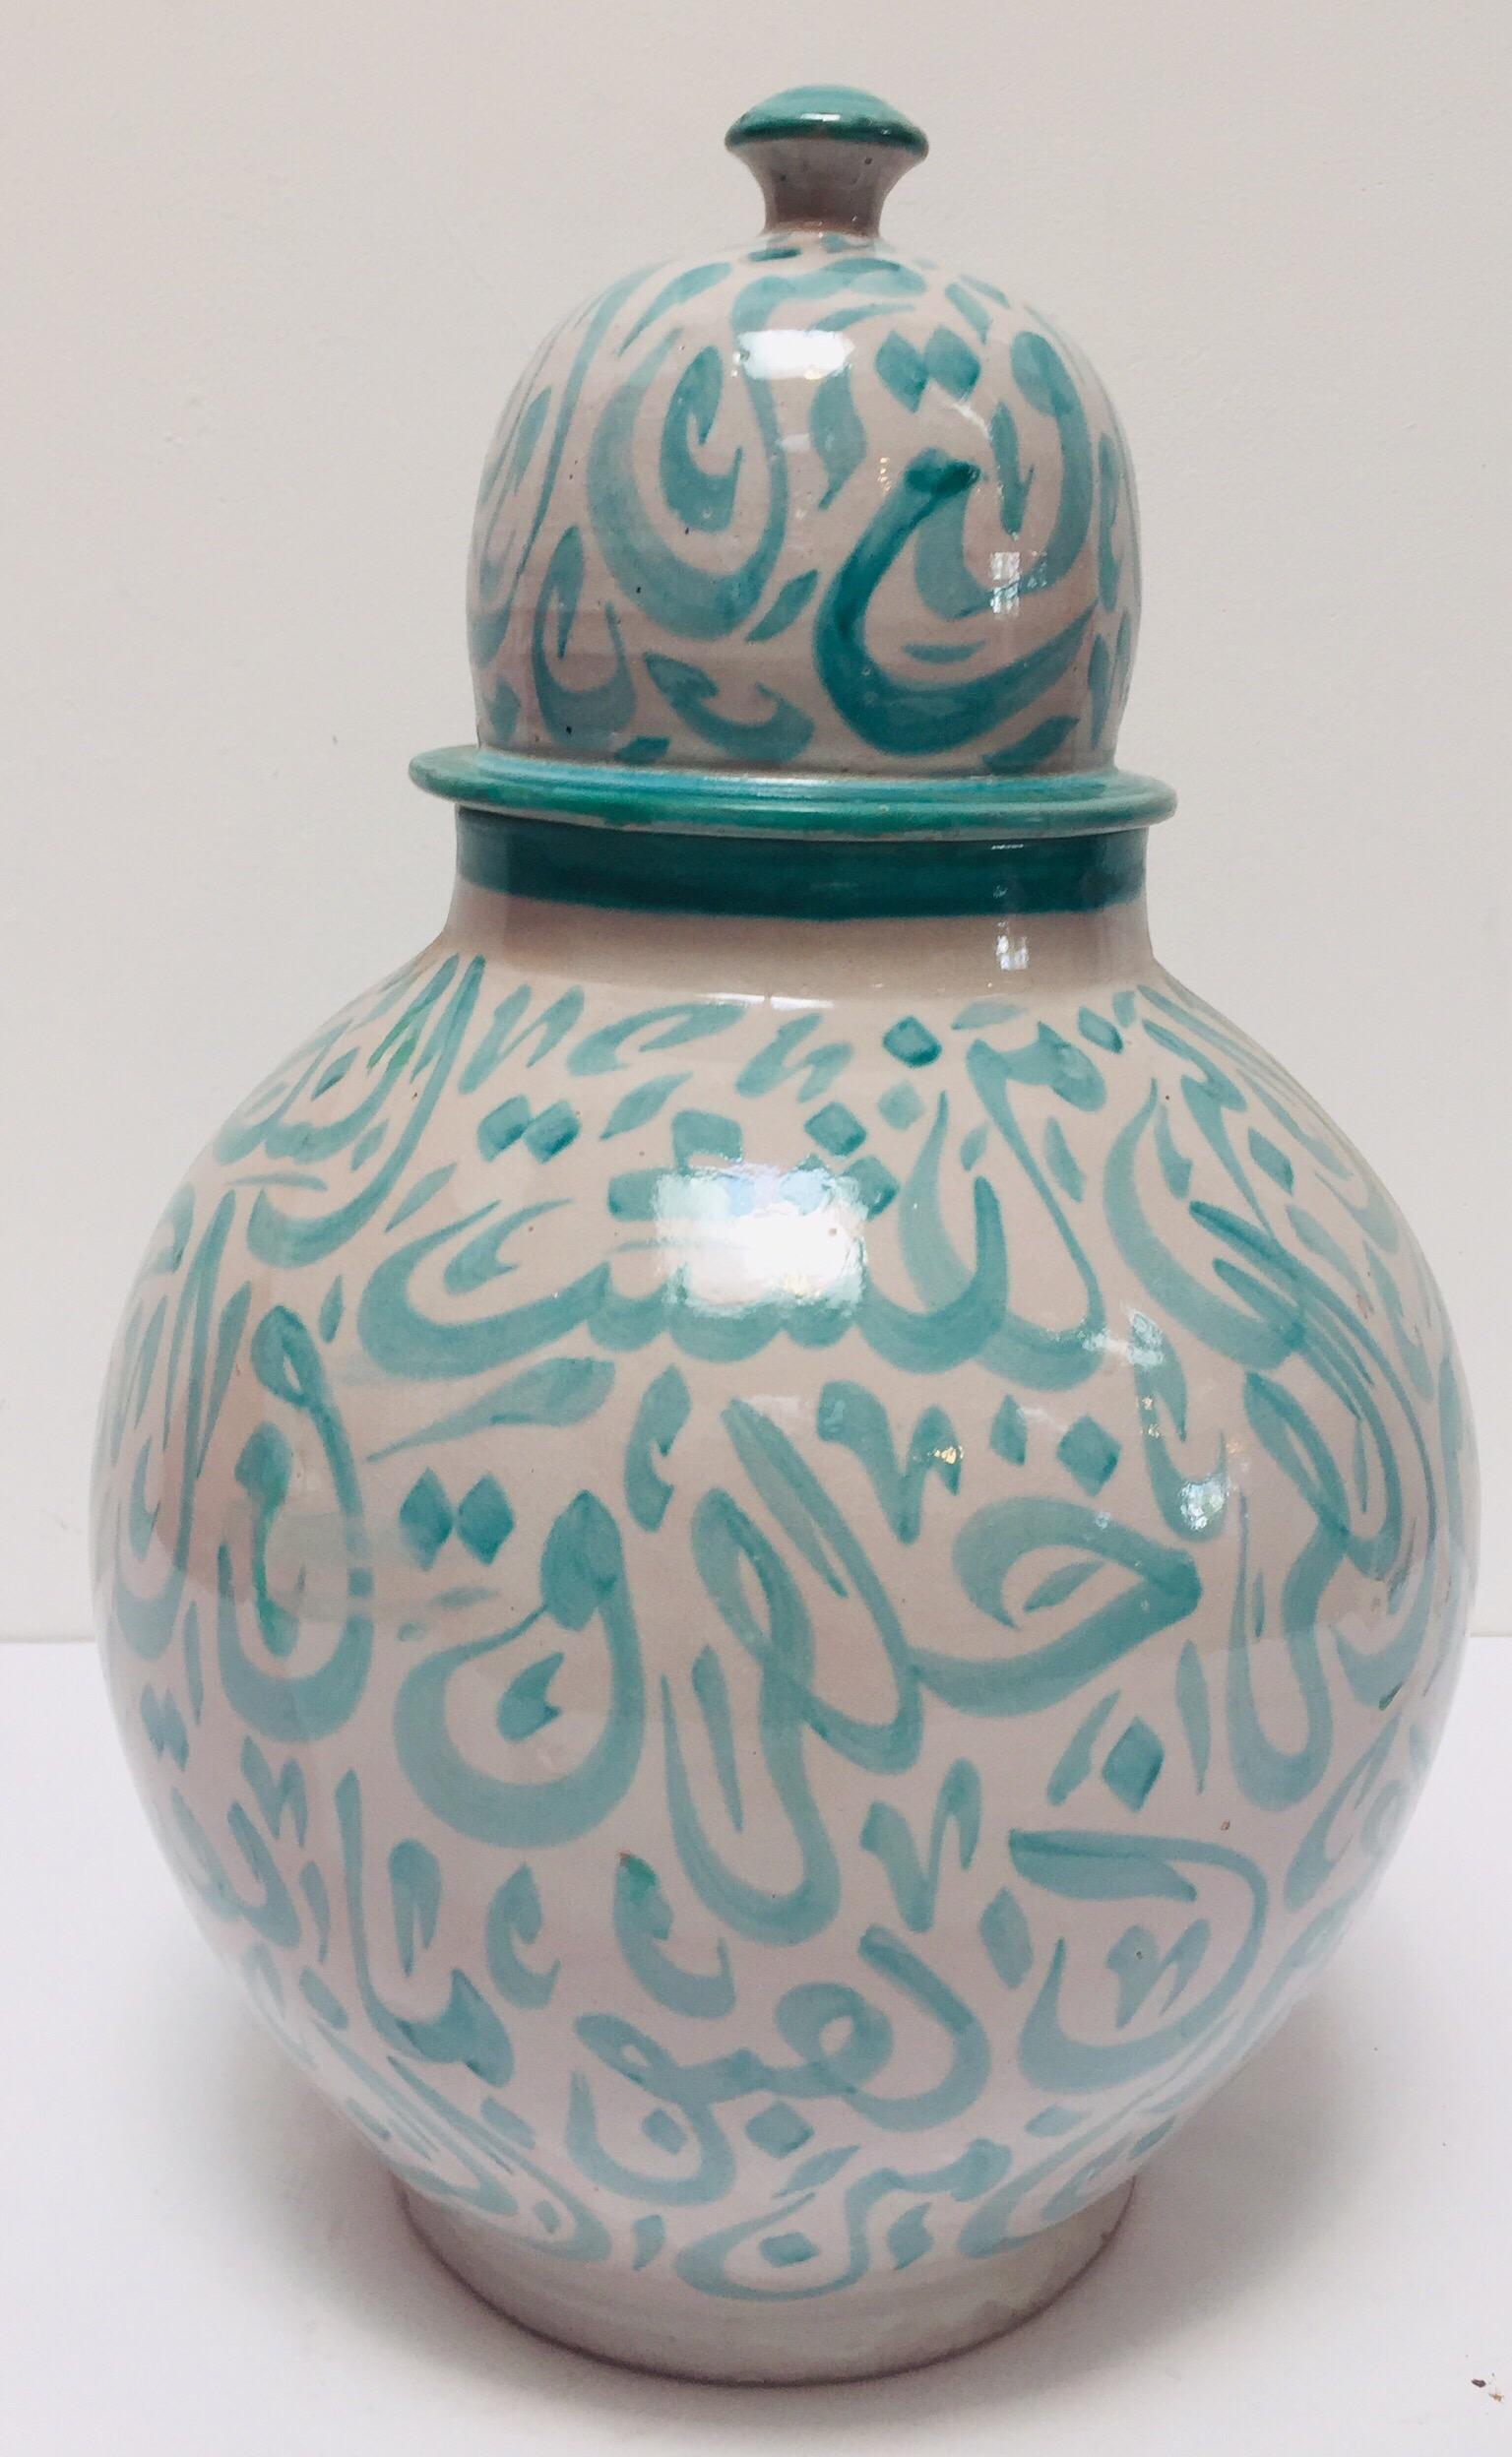 Moroccan Ceramic Lidded Urn from Fez with Arabic Calligraphy Lettrism Writing 4